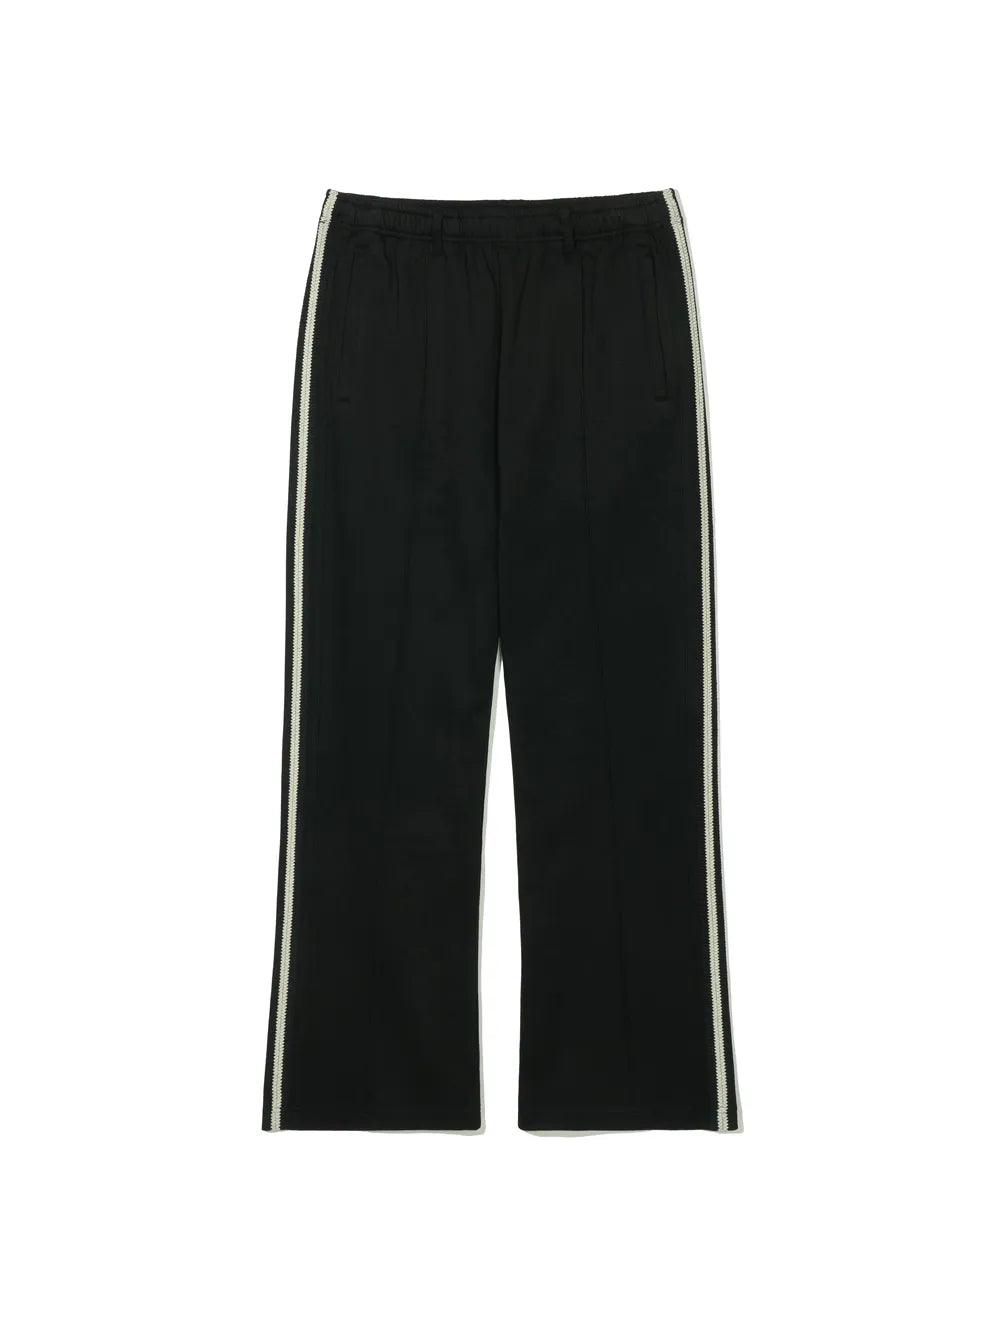 Partimento Taping Line Jersey Track Pants - Black - Pants